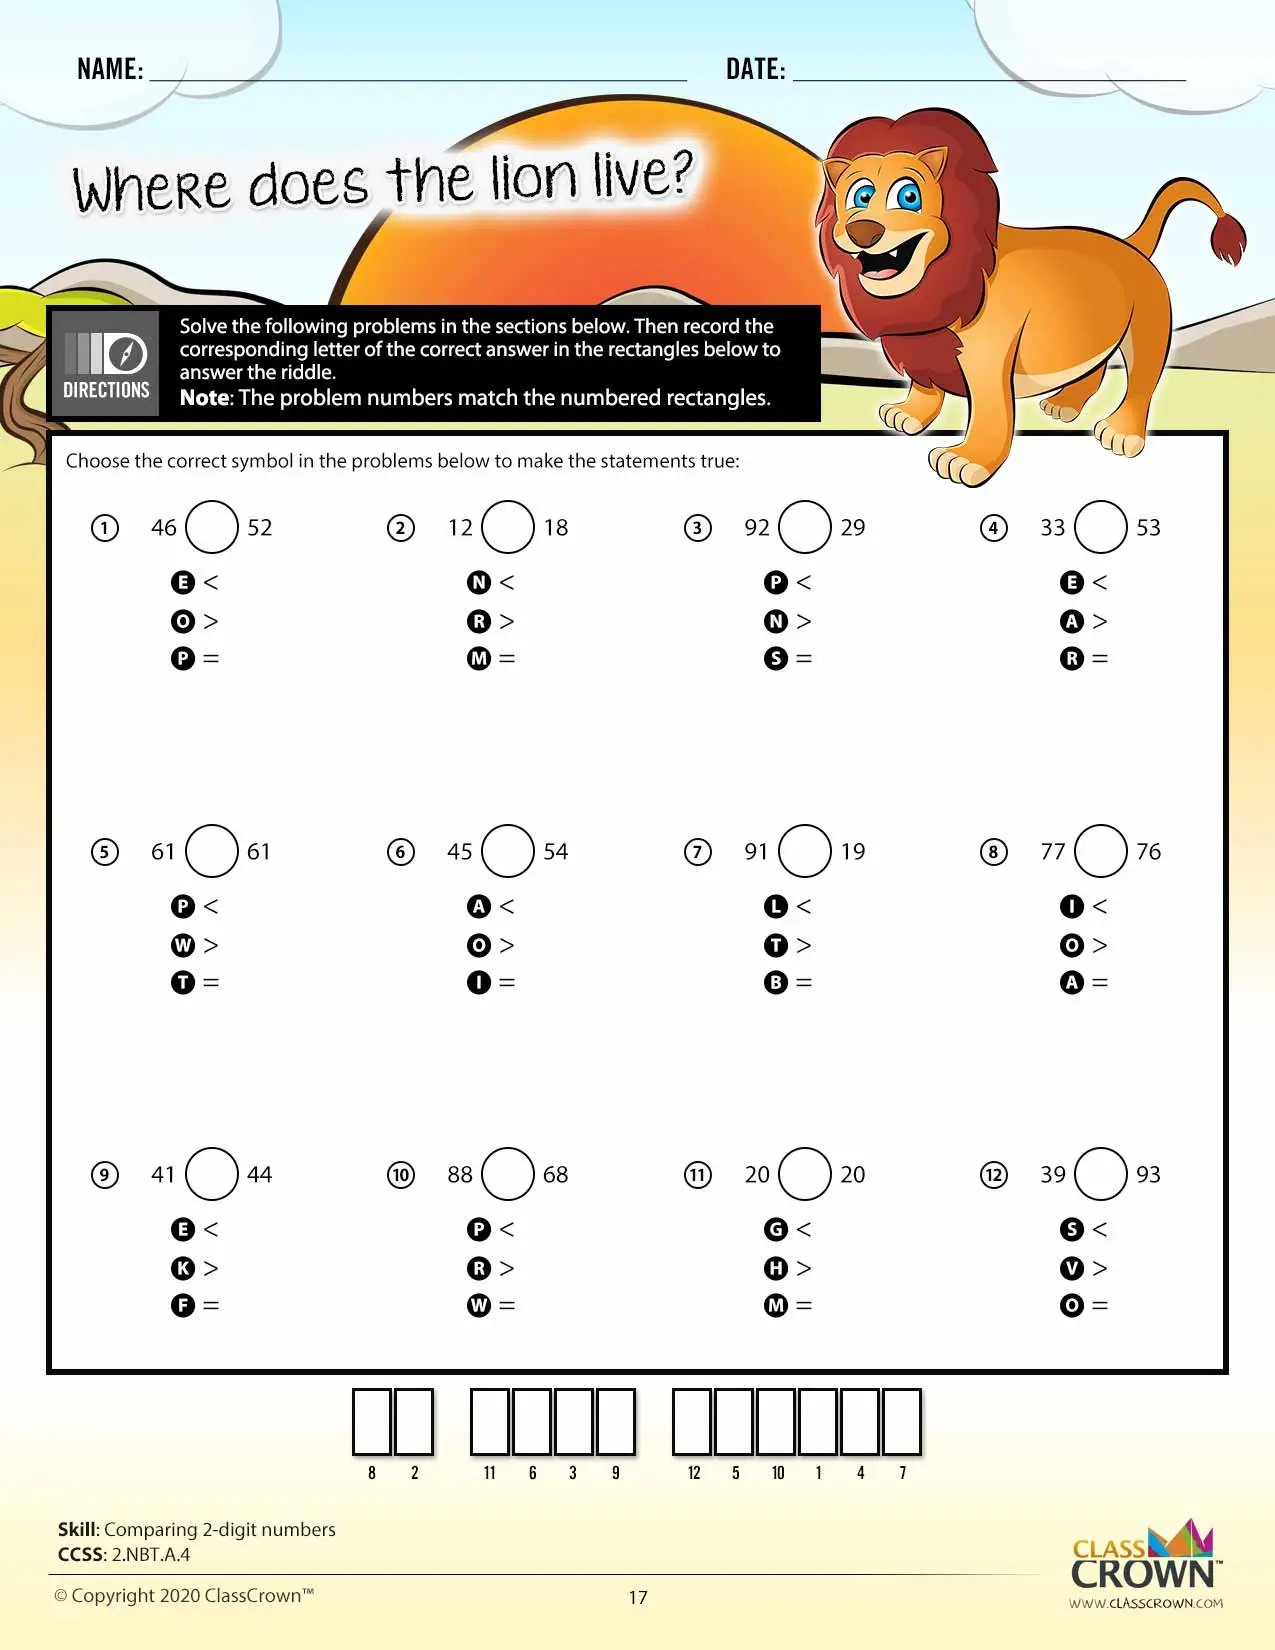 2nd grade math worksheet, comparing 2-digit numbers. Lion graphic.